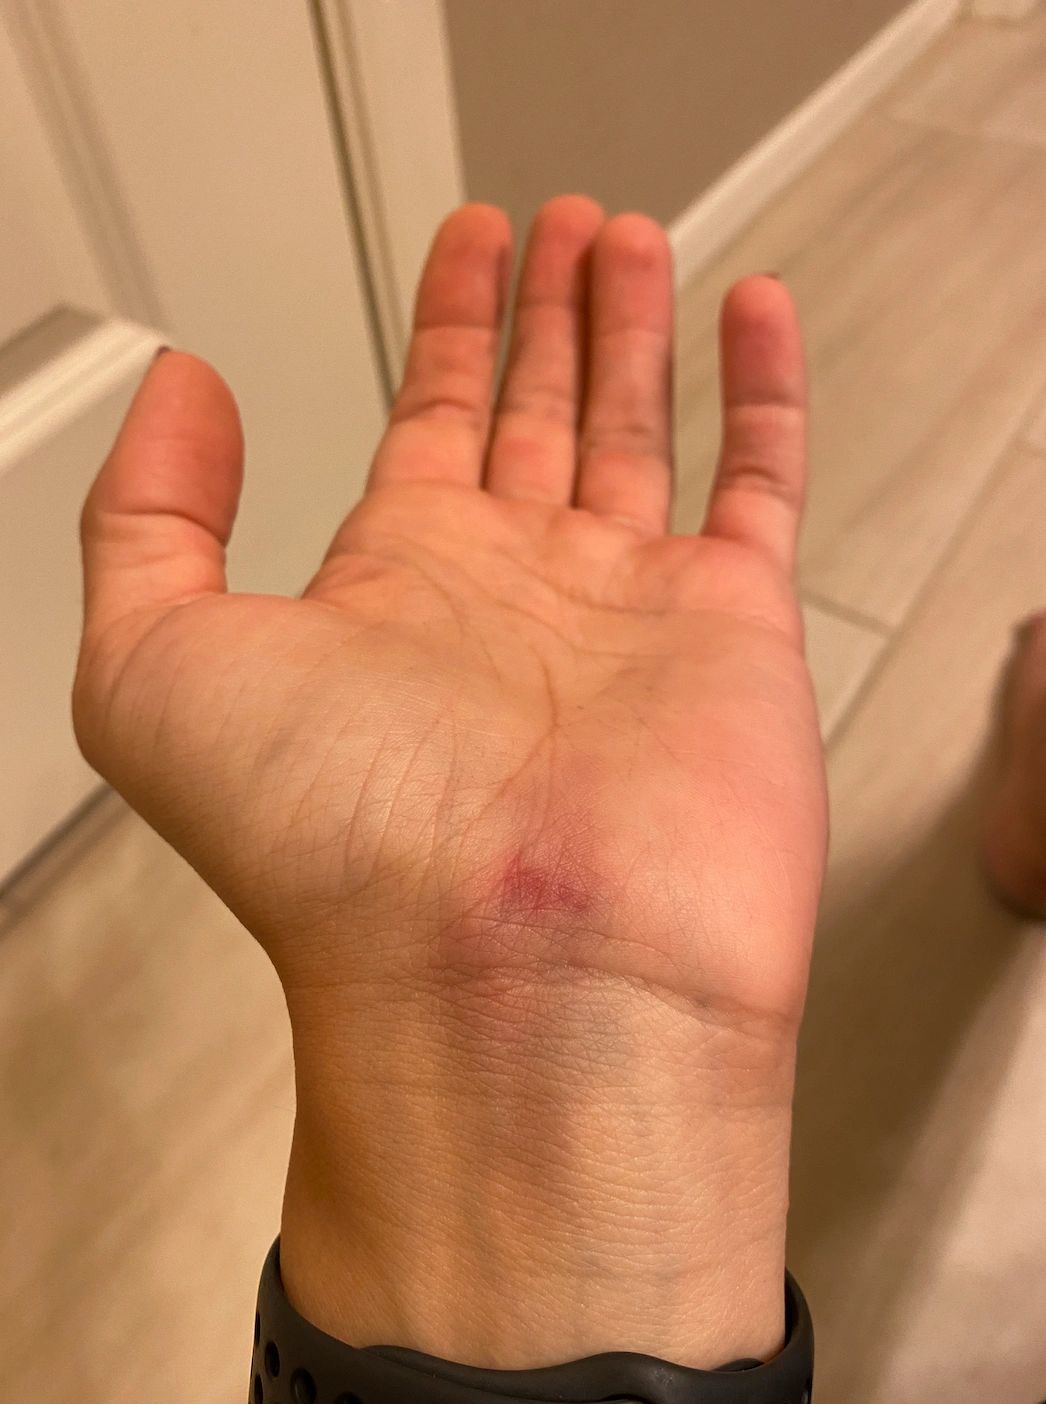 bruised knuckles from fighting